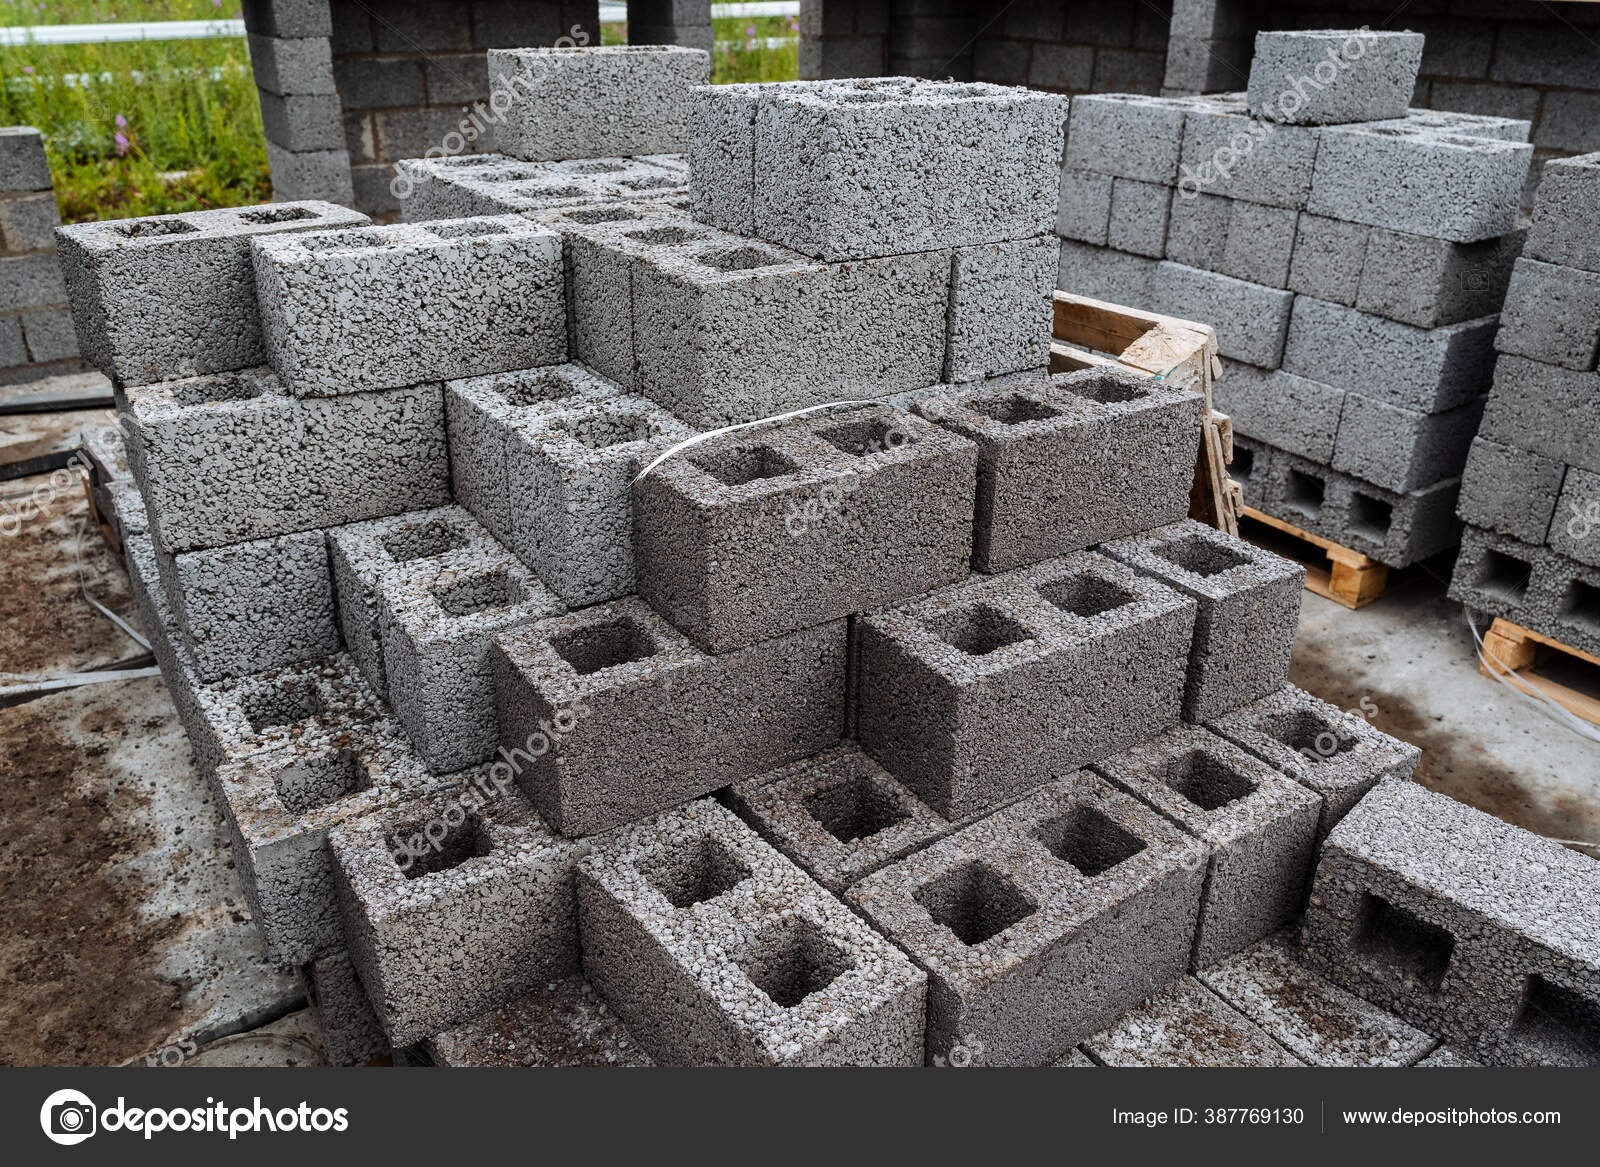 Cinder Blocks Gray Concrete Neatly Stacked Pile Slender Rows